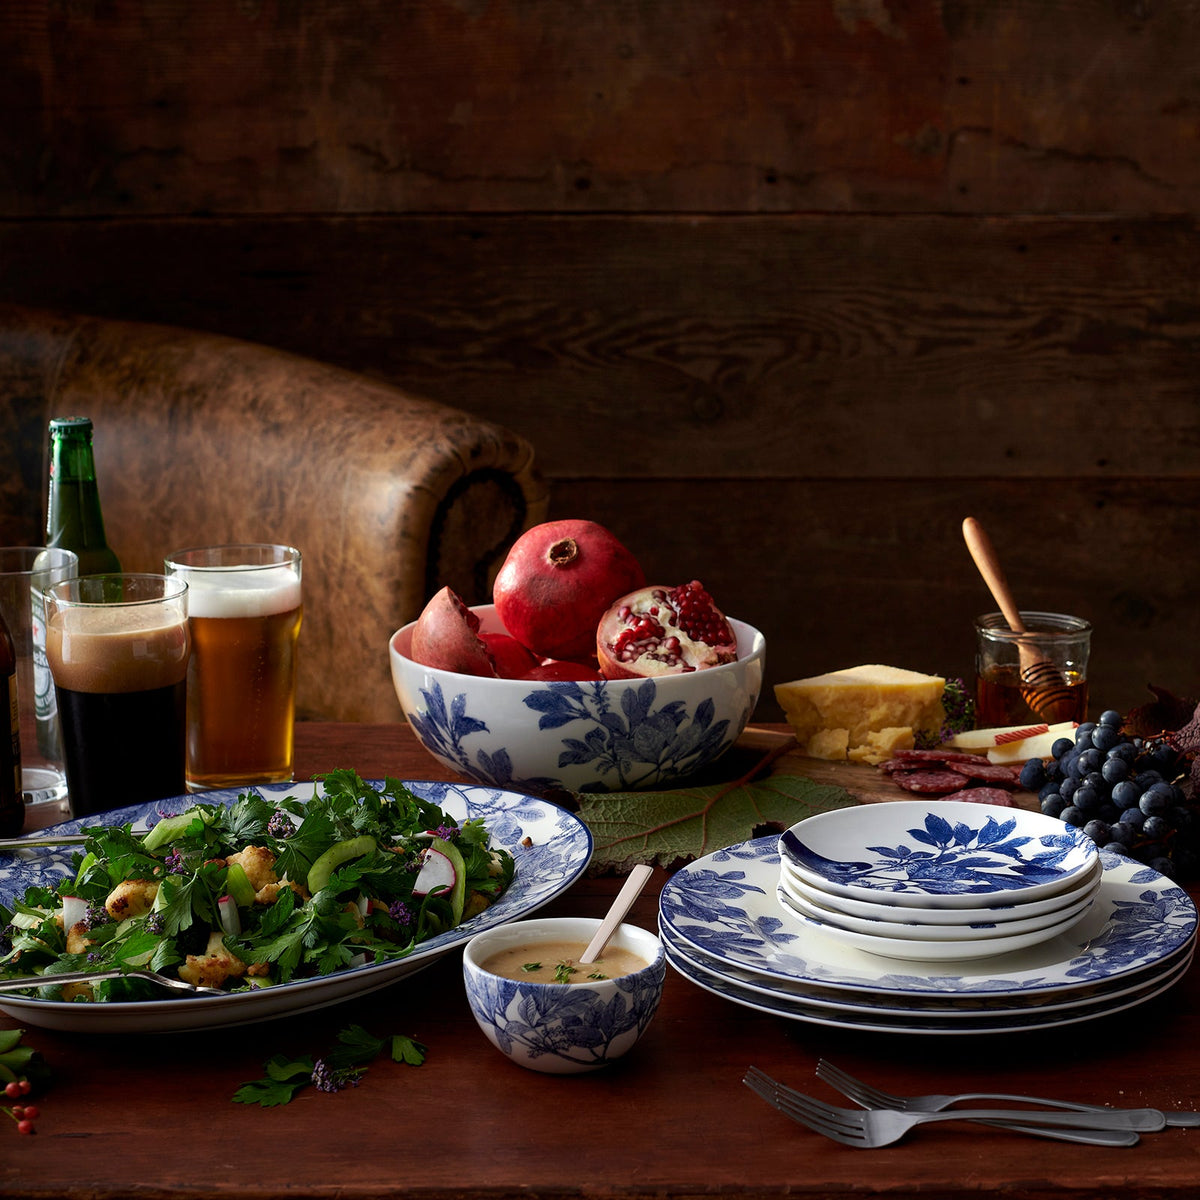 A rustic table setting with various foods, including salad, pomegranates, cheese, and drinks. Arbor Rimmed Dinner Plate by Caskata Artisanal Home, featuring blue floral patterns and delicate botanical details, are arranged around the table. The heirloom-quality dinnerware adds a timeless elegance to the scene.